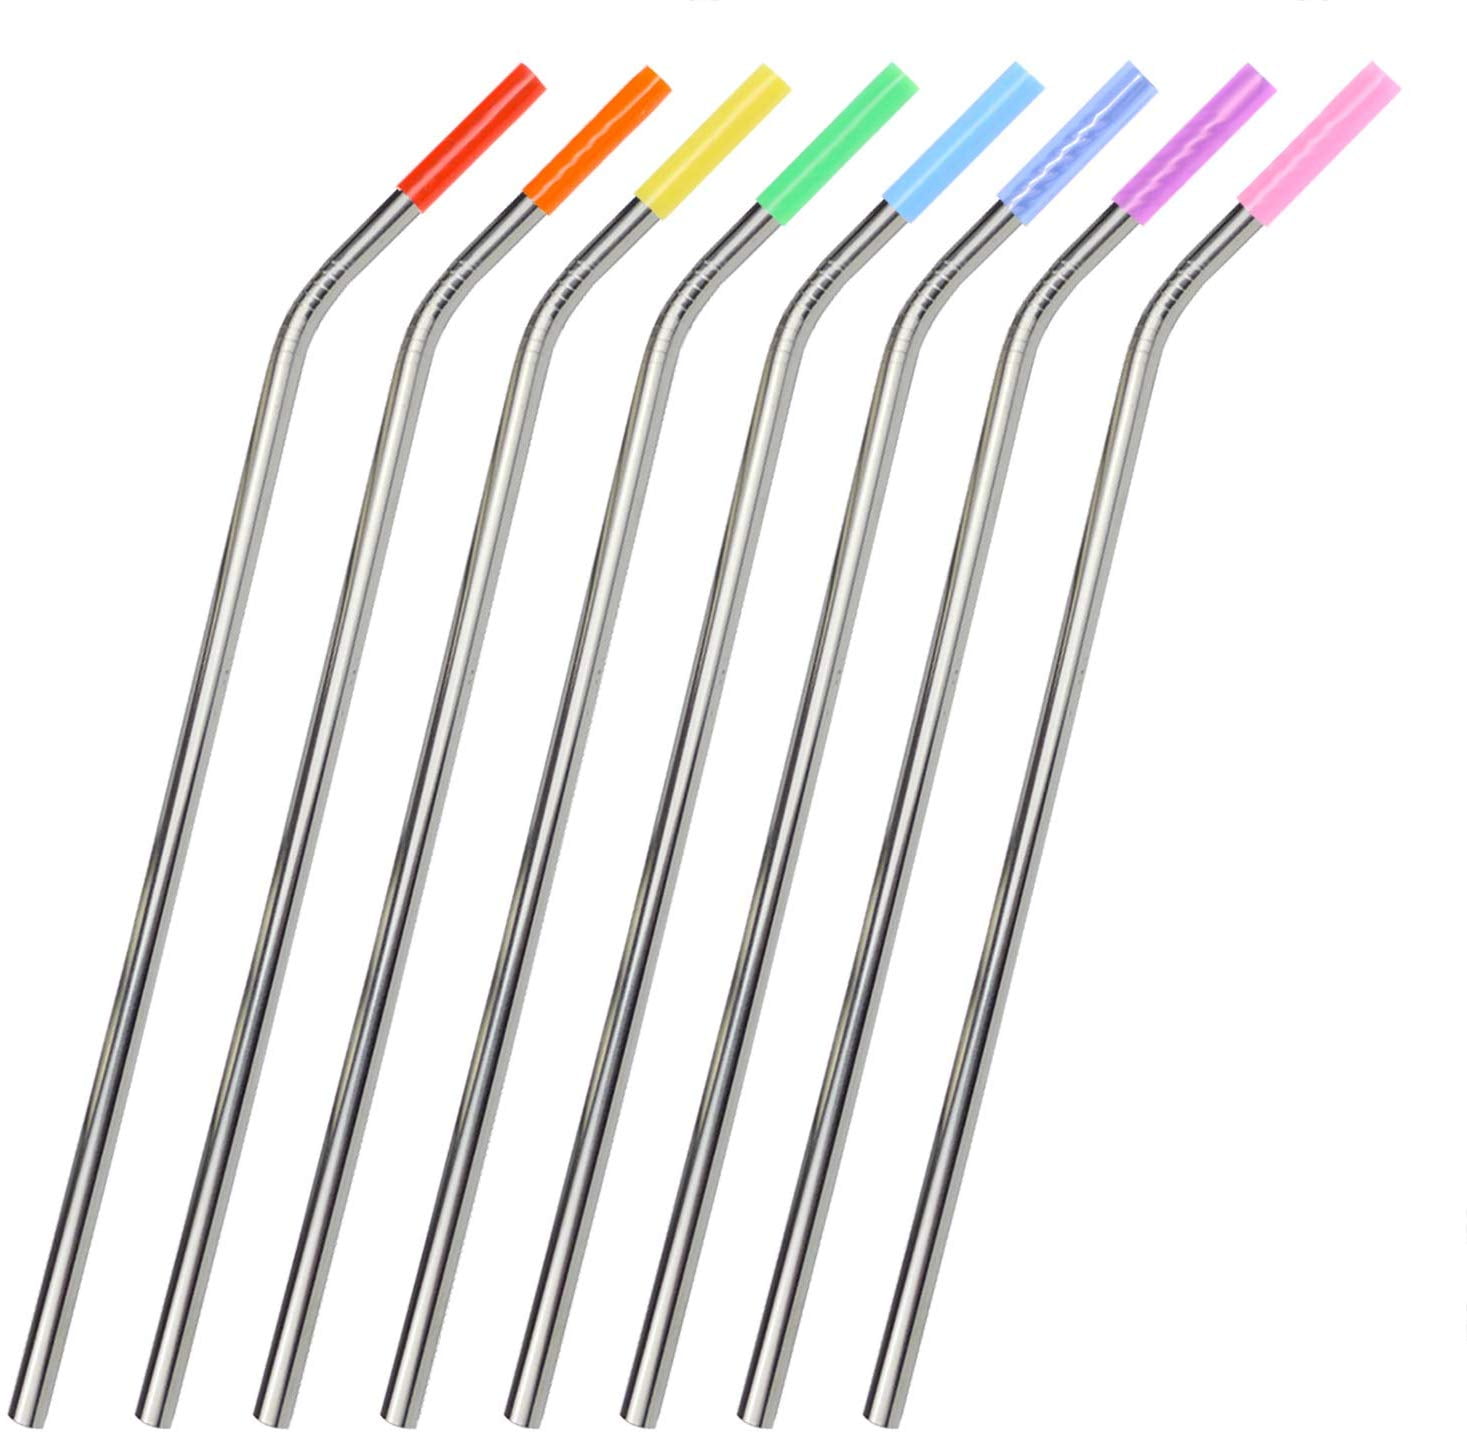 GFDesign Food Grade Silicone Straw Elbows Tips Soft Reusable Metal Stainless Steel Straw Nozzles Only Fit for 5/16 Wide (8mm Outer Diameter)